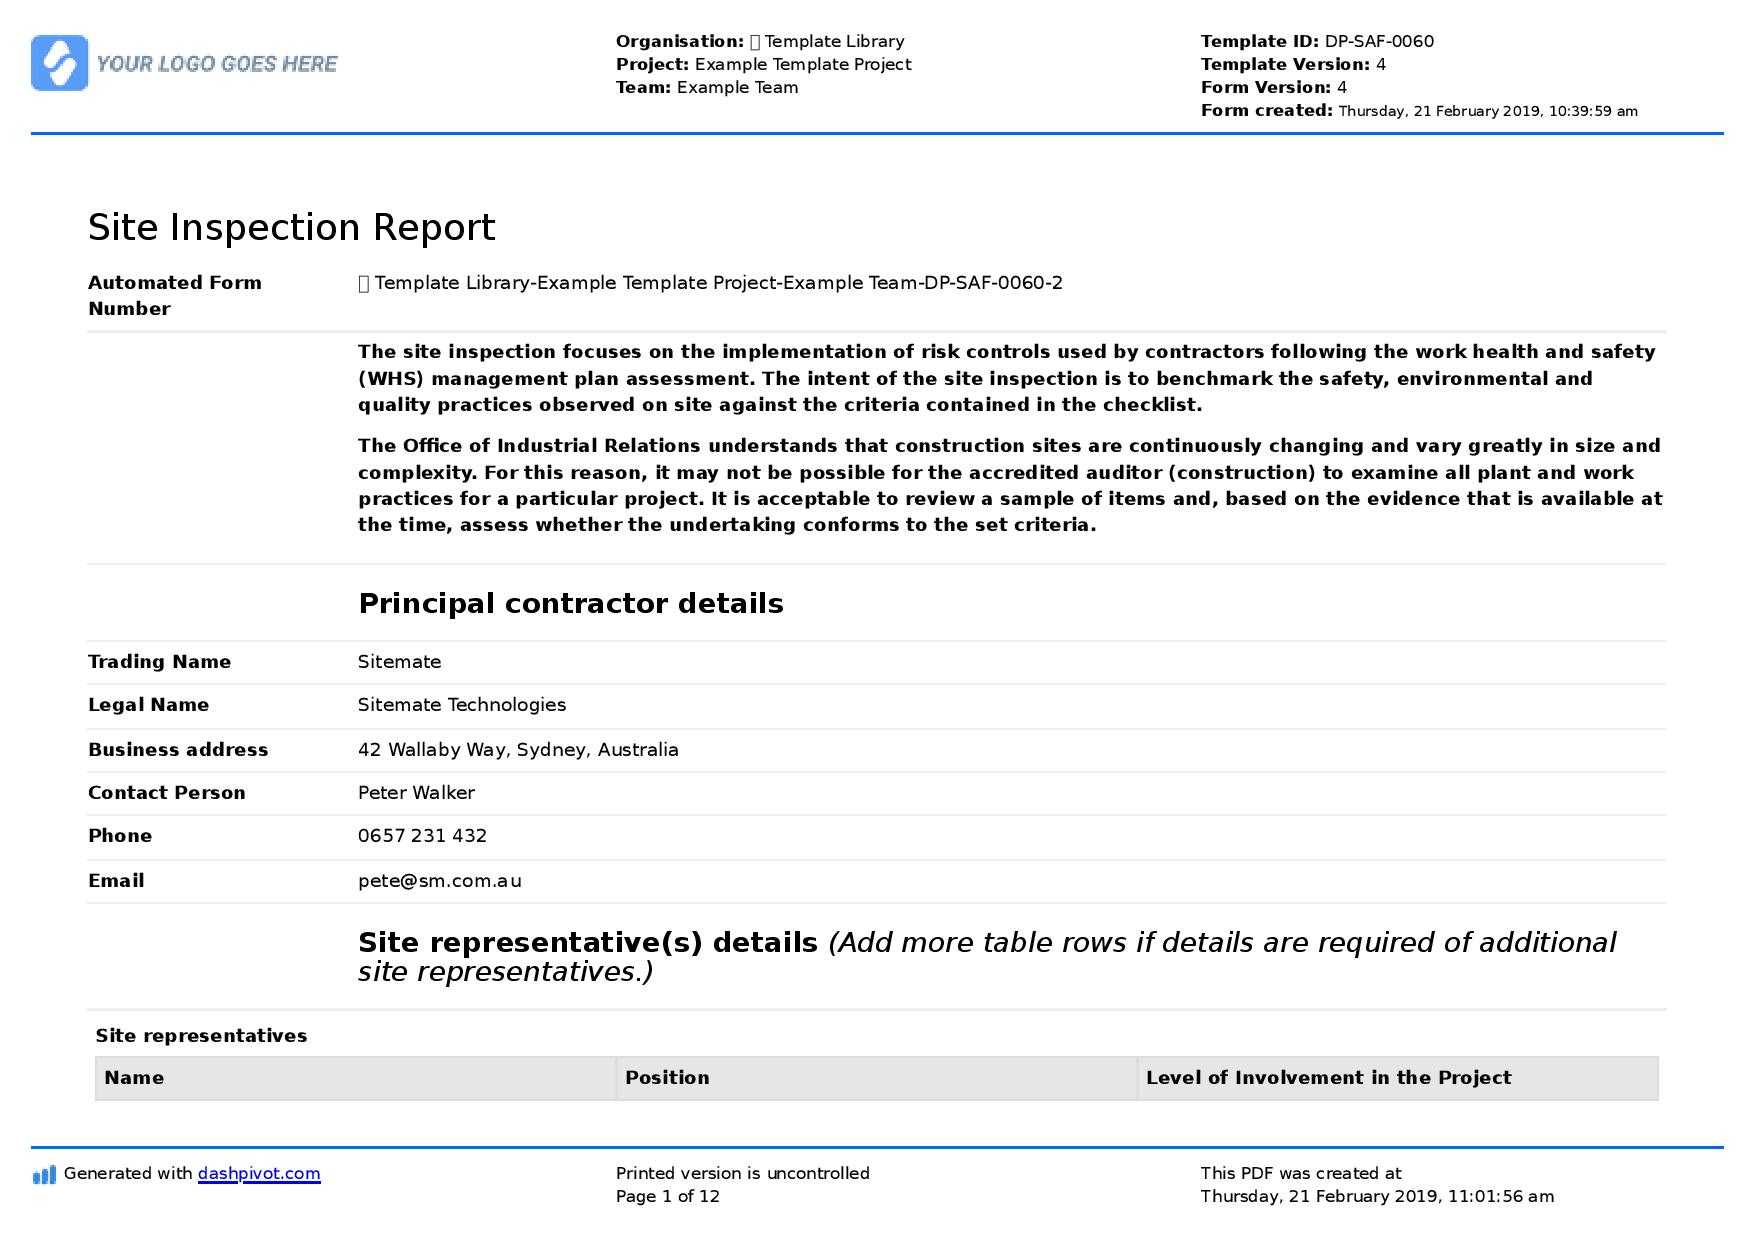 Site Inspection Report: Free Template, Sample And A Proven In Daily Inspection Report Template